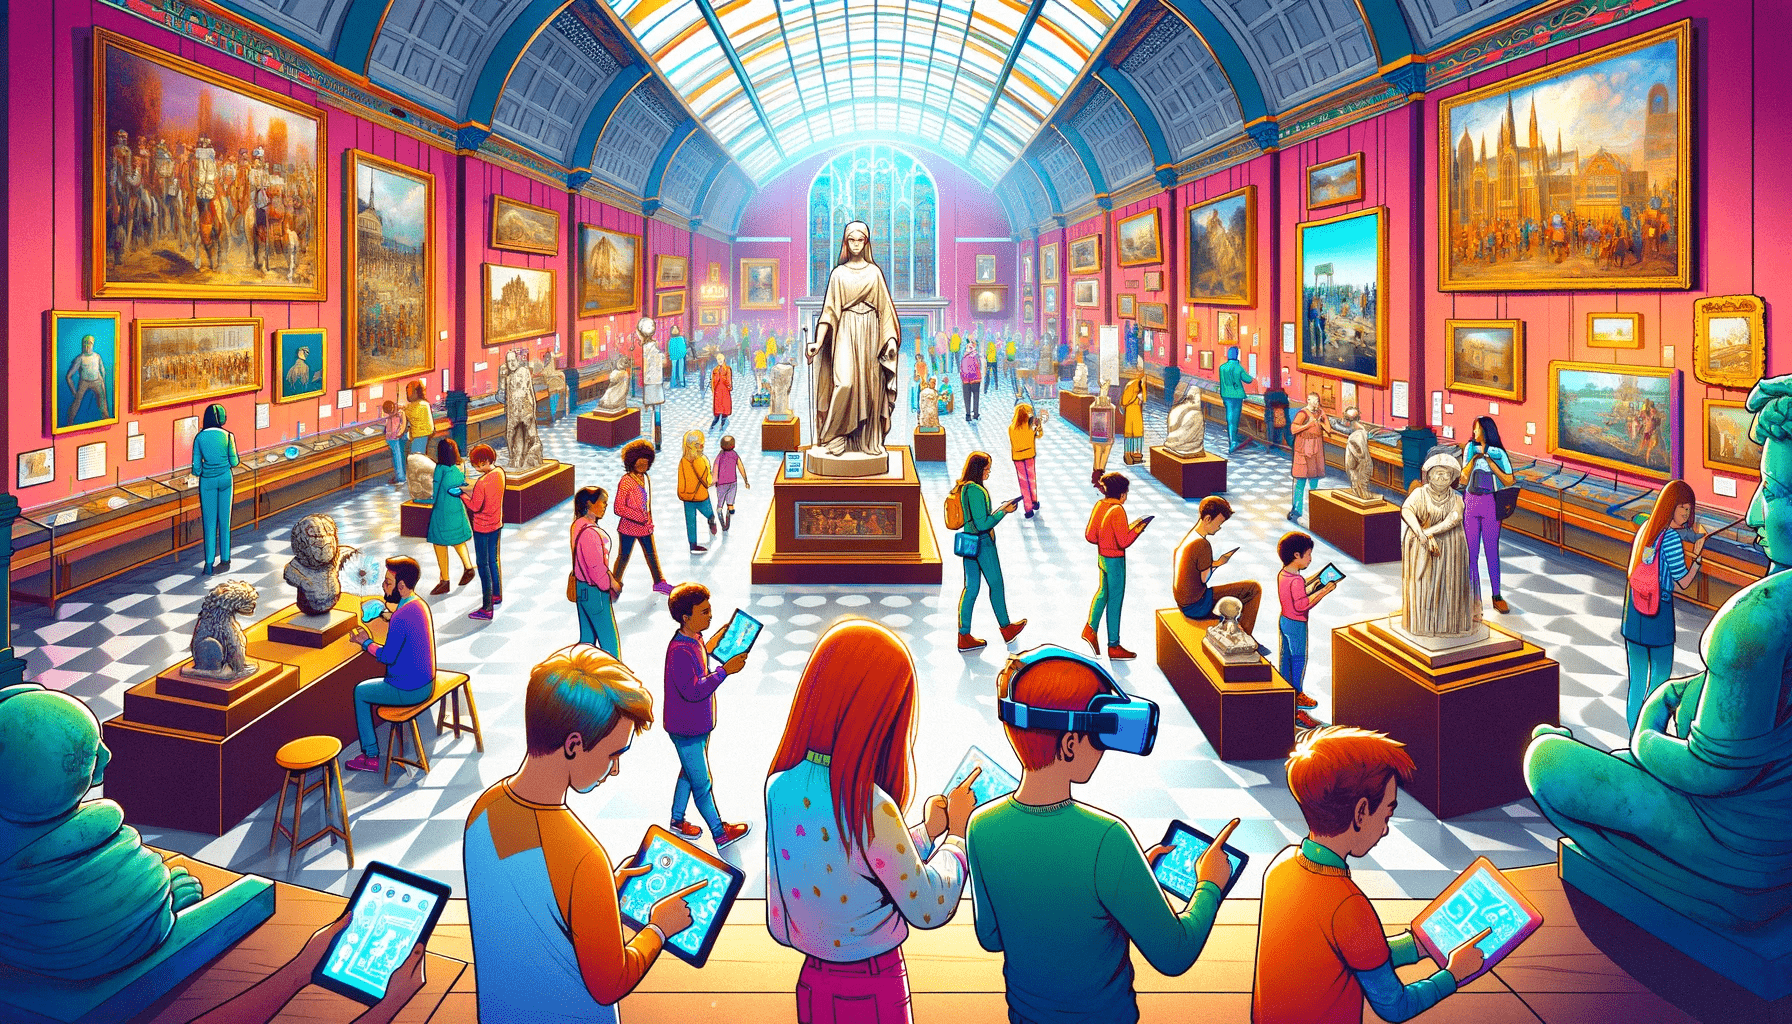 This image vividly depicts a group of diverse visitors in a museum, engaging with interactive, educational games using tablets and virtual reality headsets. The museum is adorned with historical artifacts, and the atmosphere is lively and colorful, capturing the essence of merging technology with education in a museum setting.